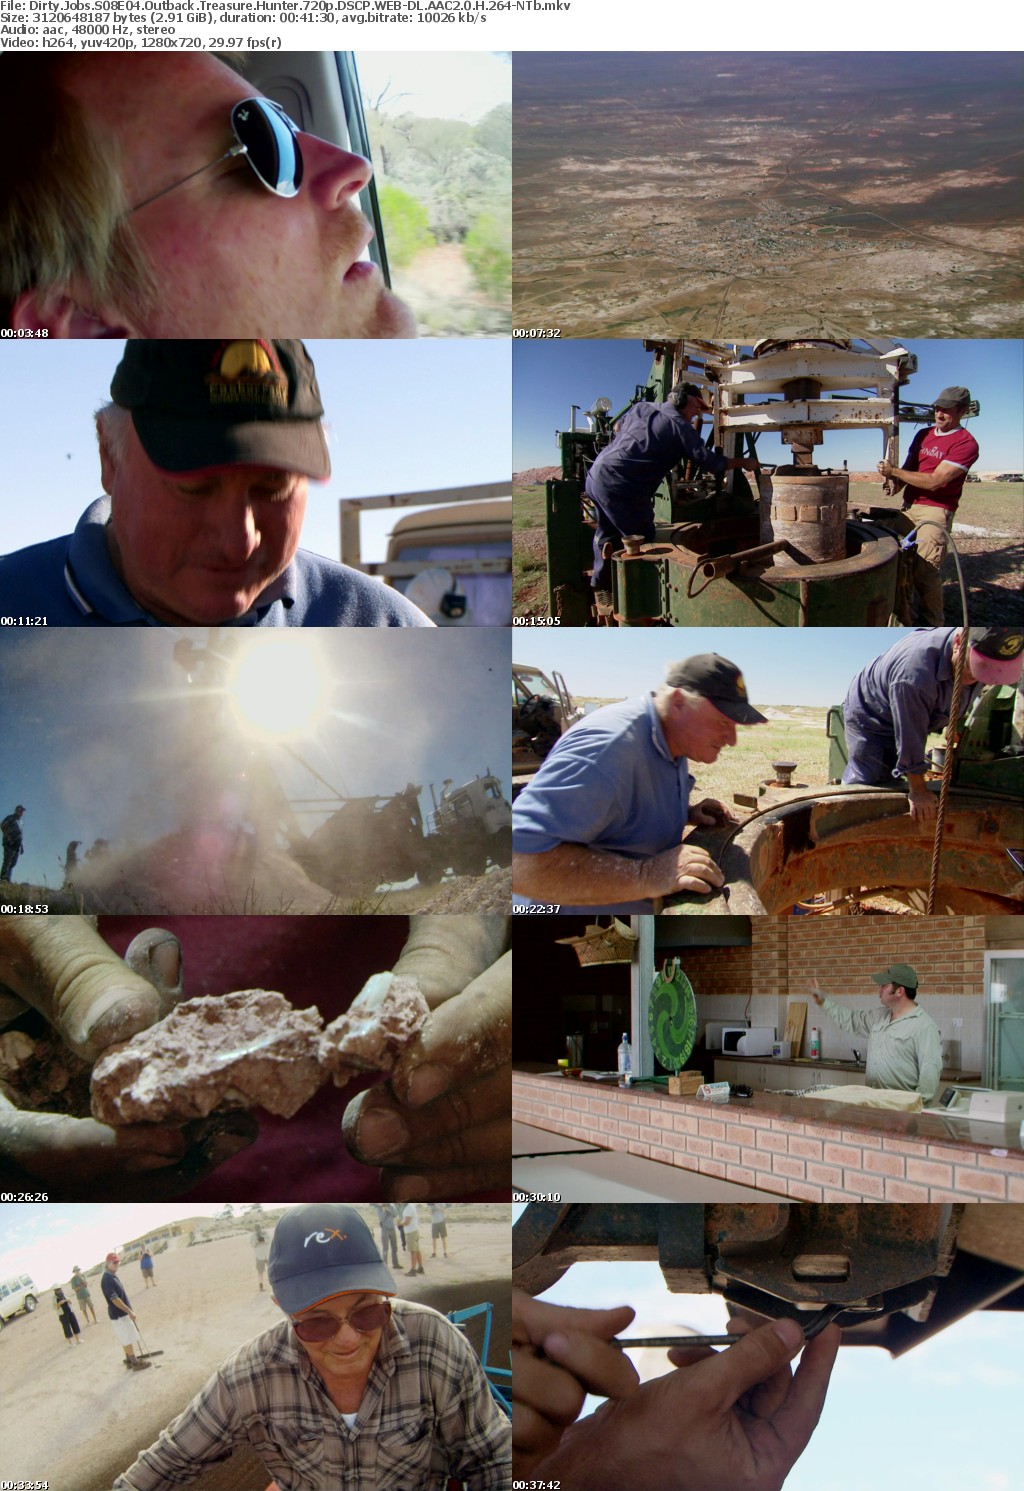 Dirty Jobs S08E04 Outback Treasure Hunter 720p DSCP WEB-DL AAC2 0 H 264-NTb